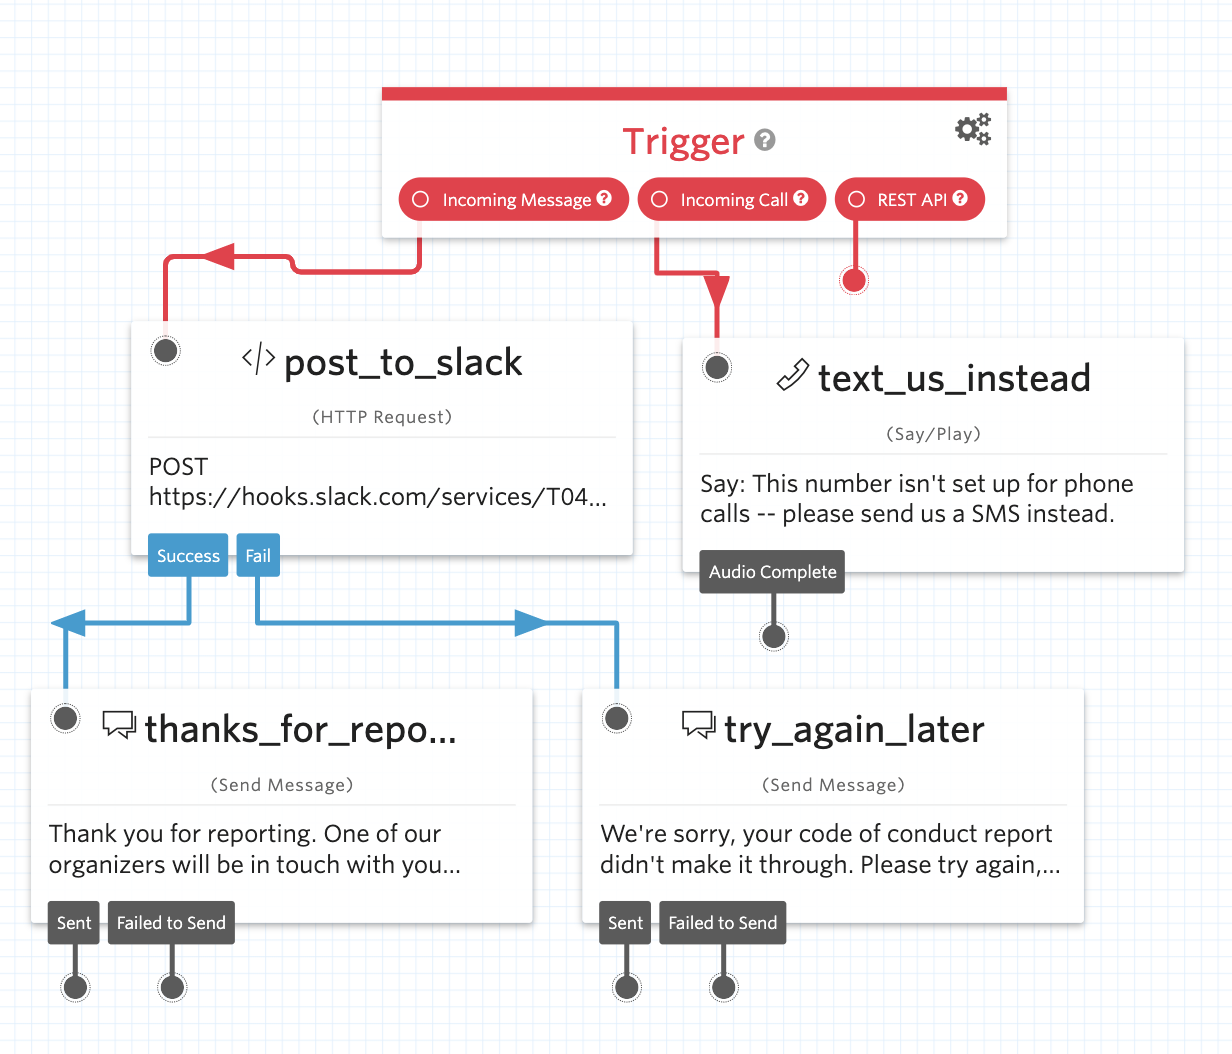 The UI for an entire Twilio Studio code of conduct reporting workflow.